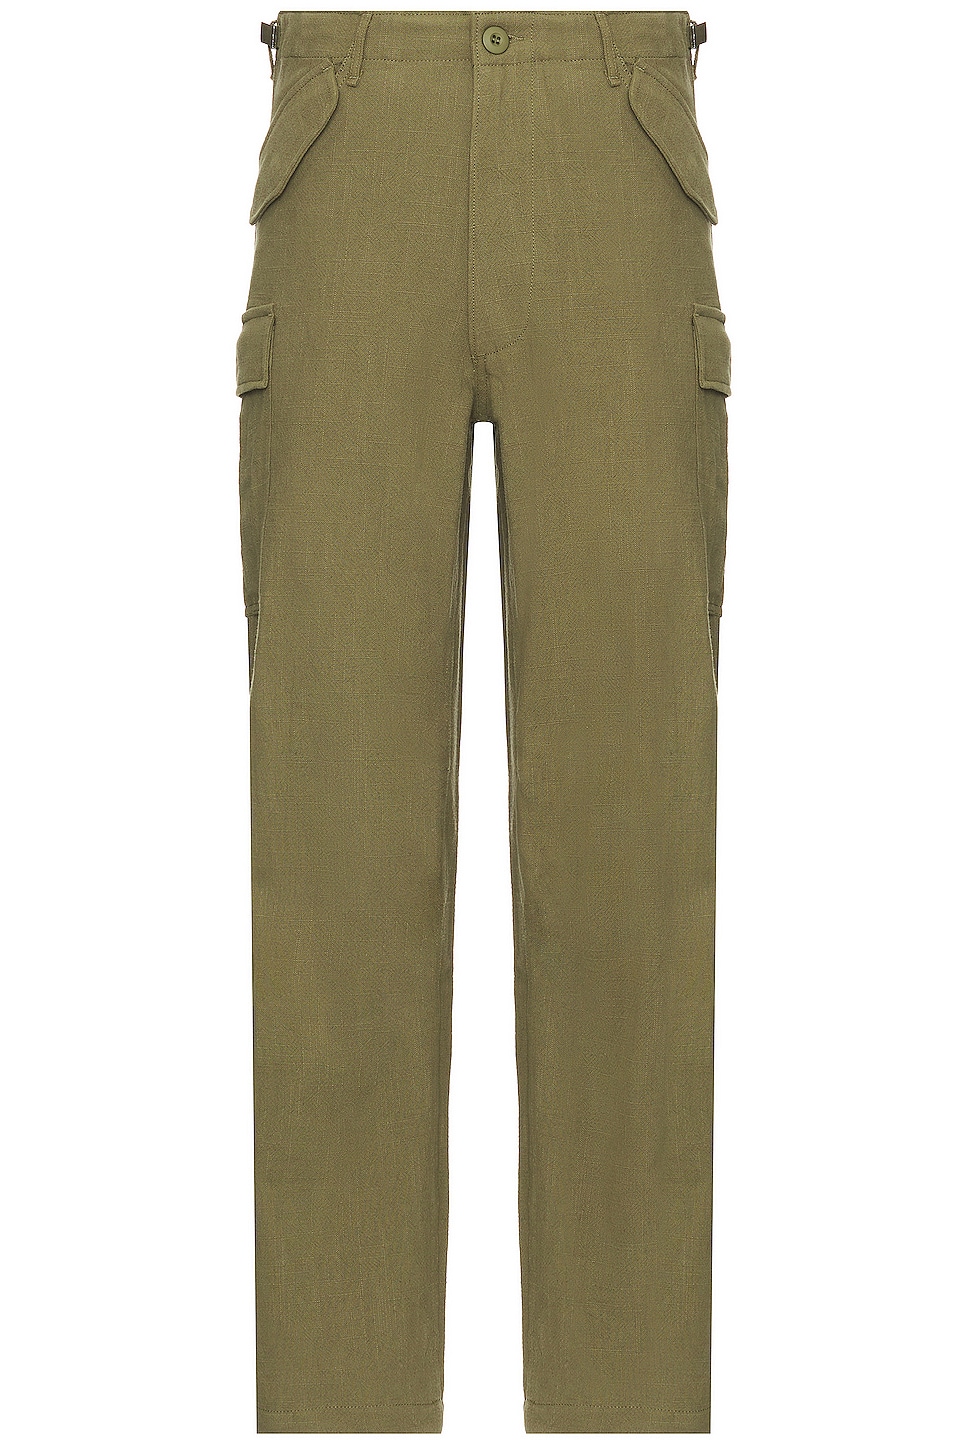 Image 1 of Mister Green Cargo Pant in Olive